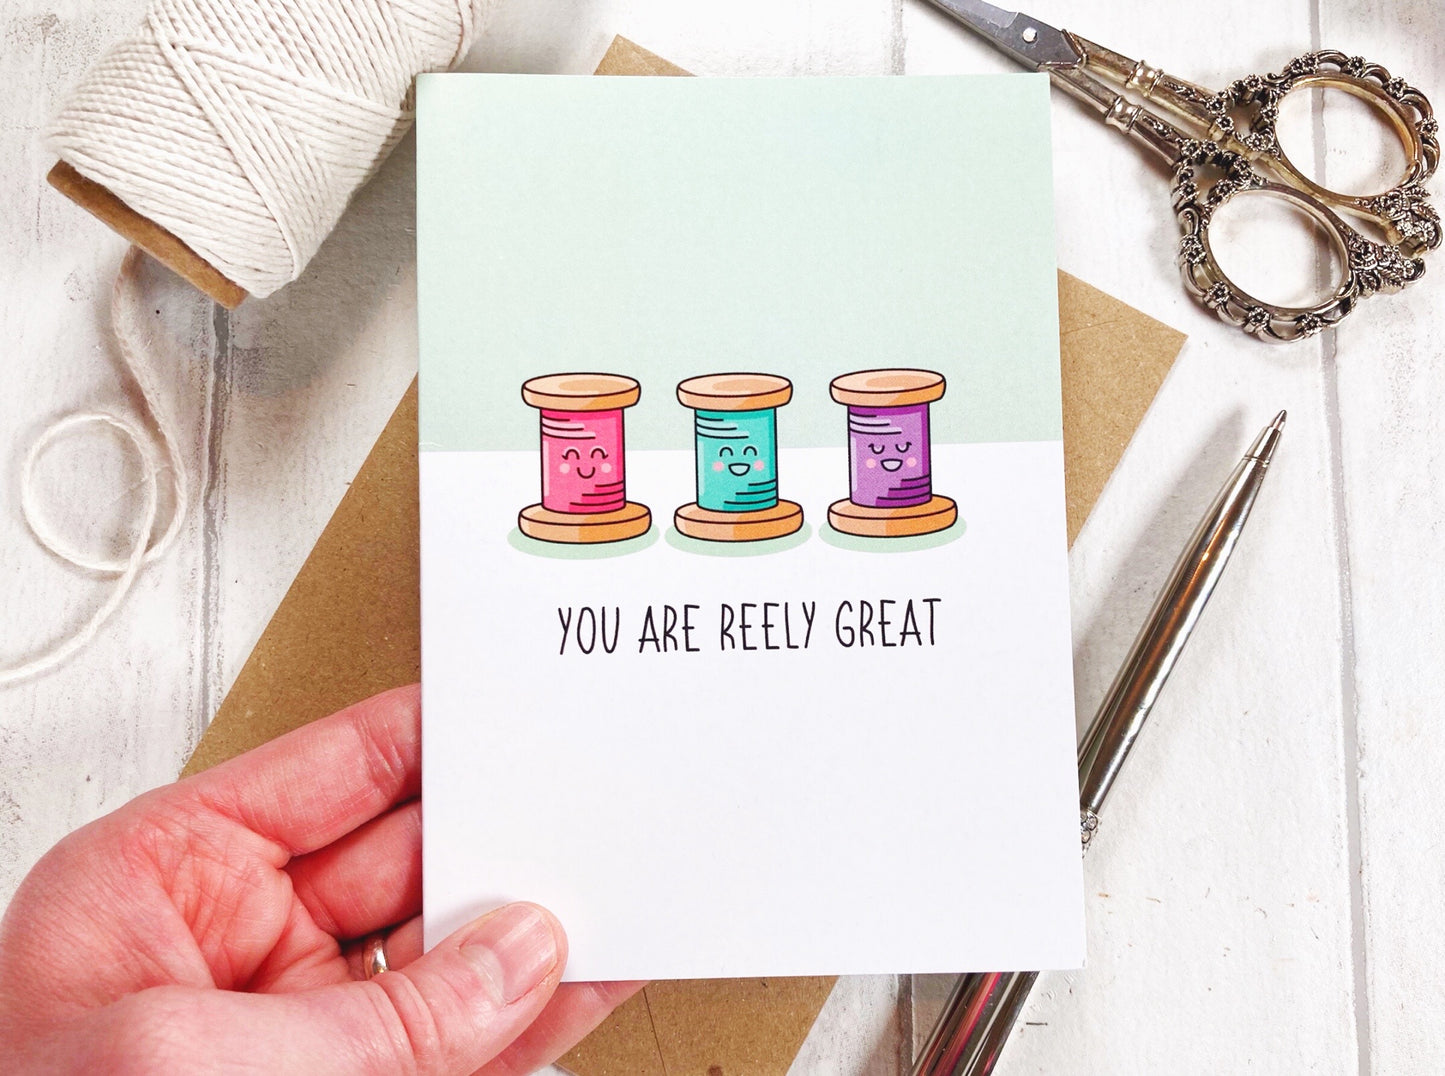 Pun Reely - A6 Greetings Card by Little Green Stitches